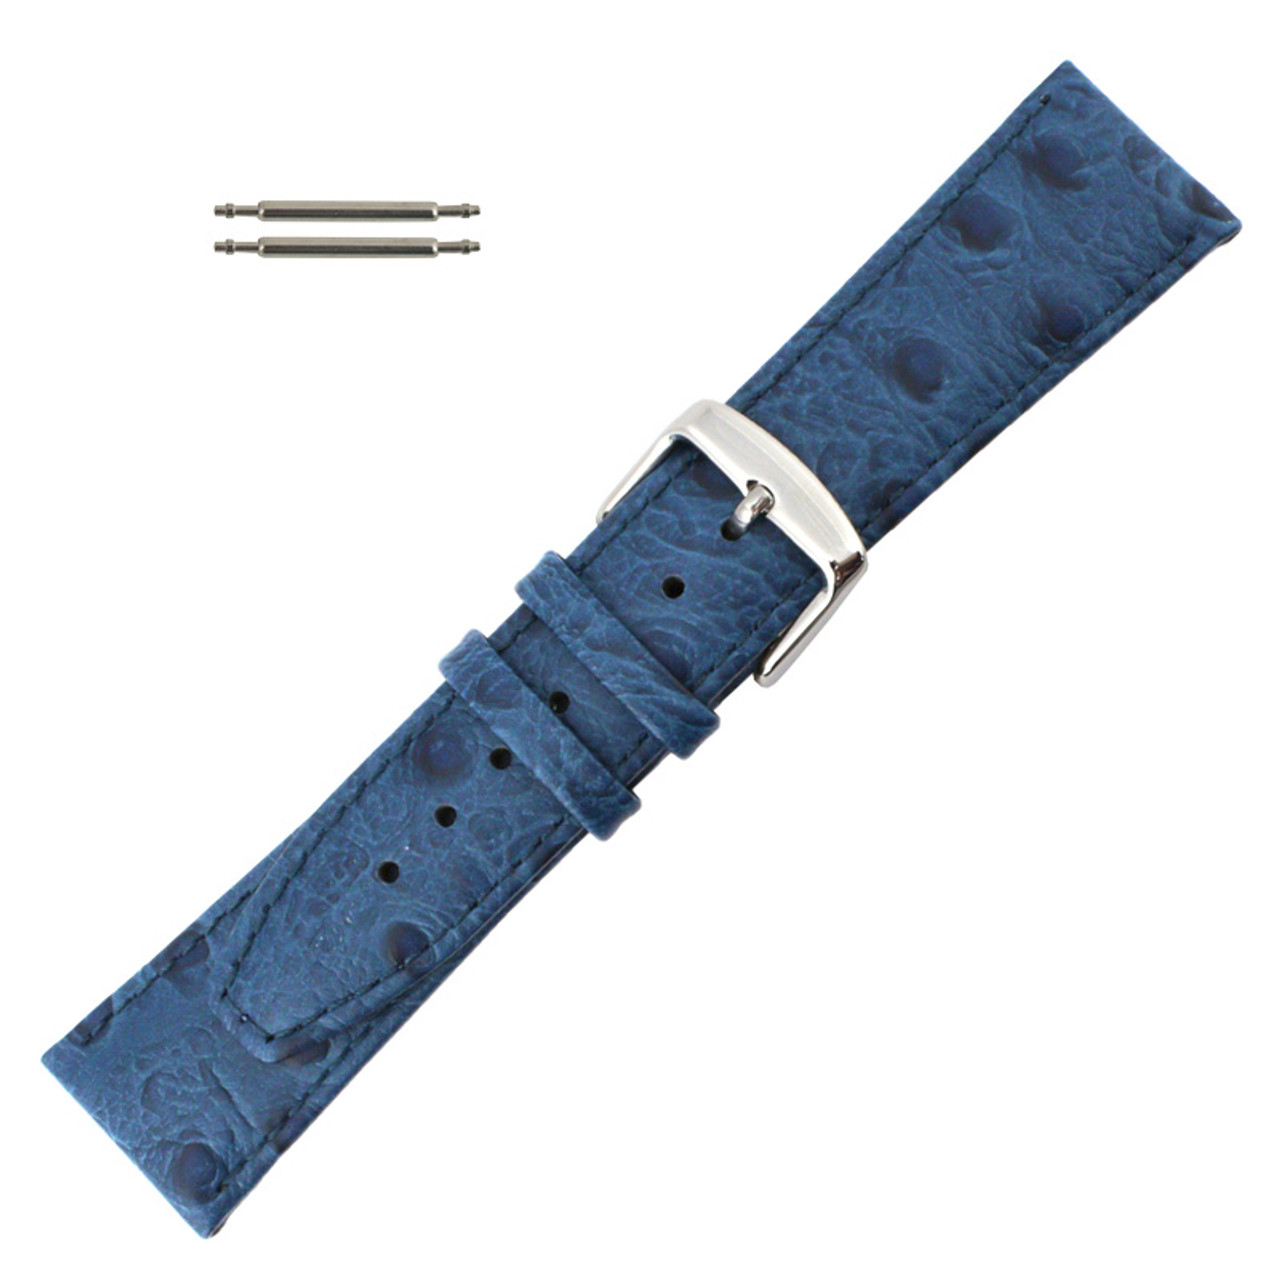  Ewatchparts 22MM STRAP BAND COMPATIBLE WITH GRAND TAG